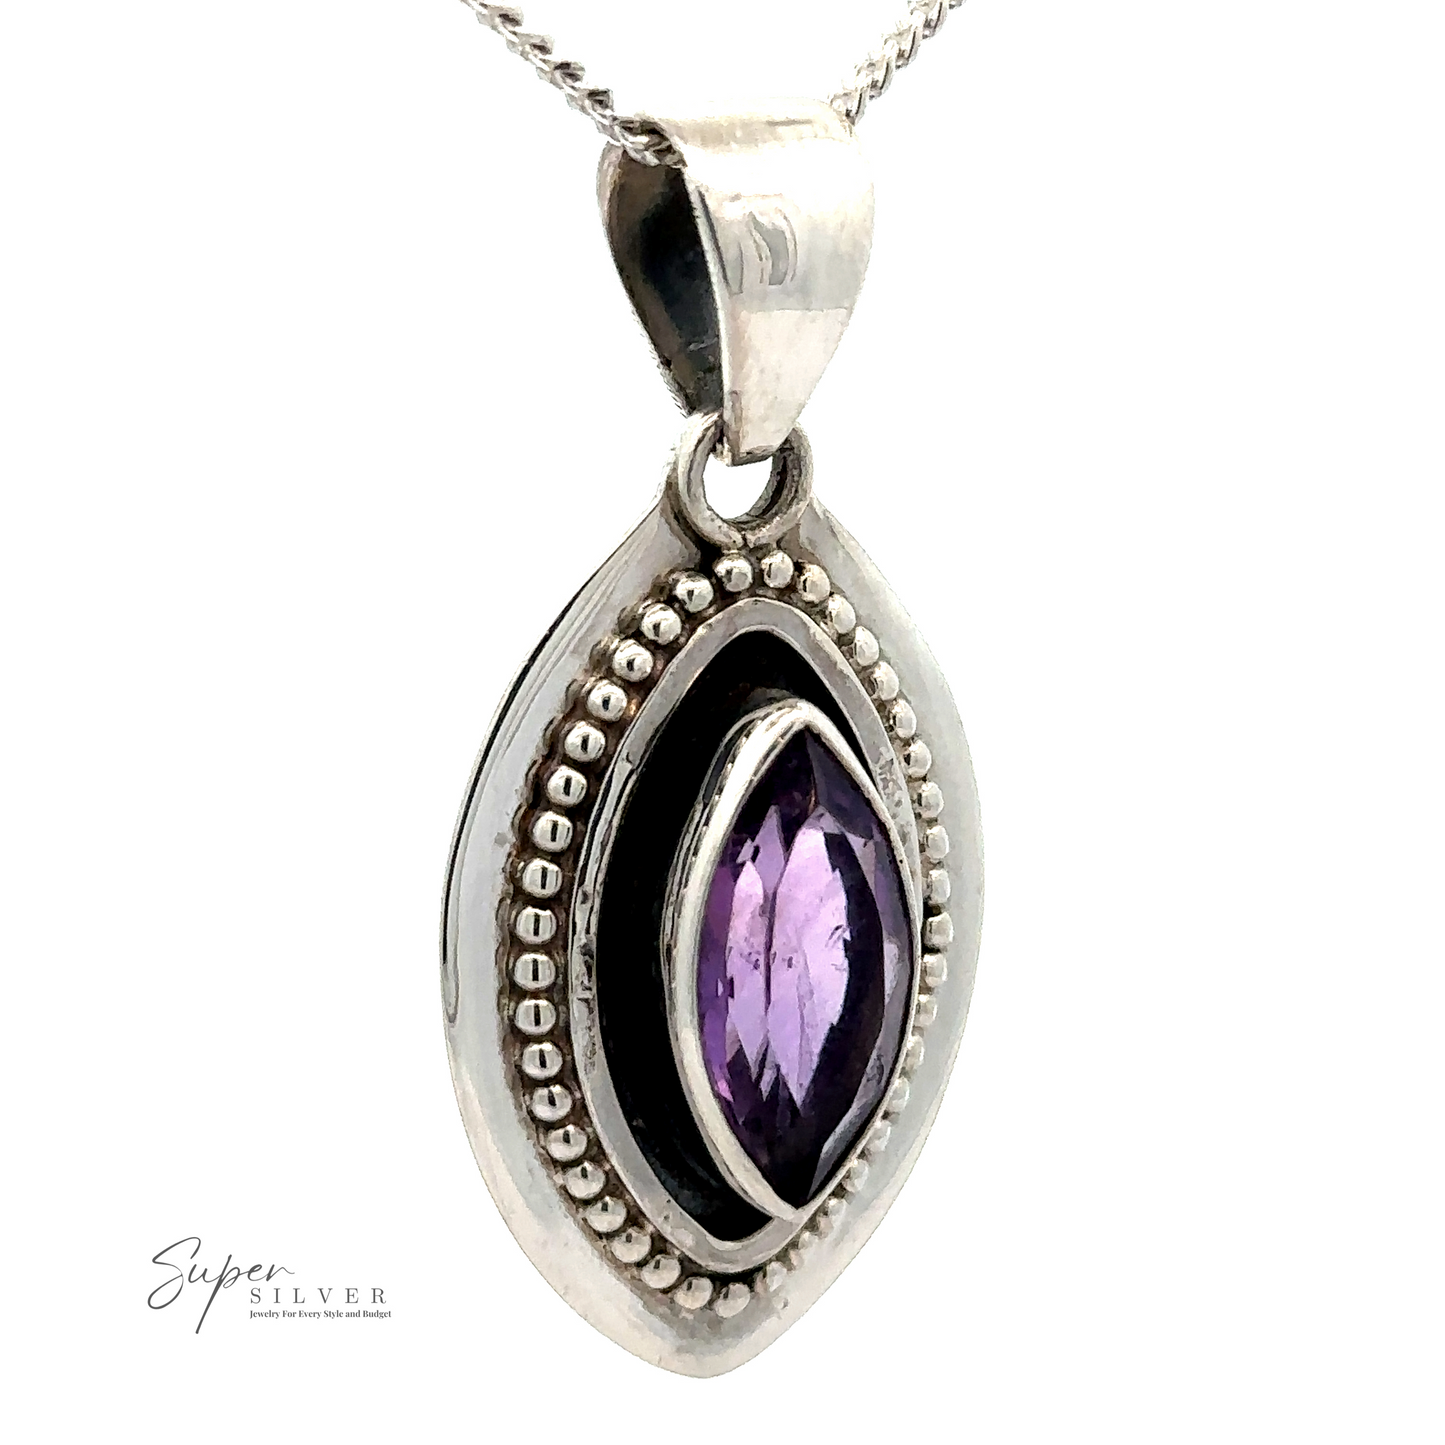 
                  
                    A Beautiful Marquise Pendant With Beaded Design featuring a faceted amethyst gemstone at the center, surrounded by a beaded design. The "Super Silver" logo is visible in the bottom left corner.
                  
                